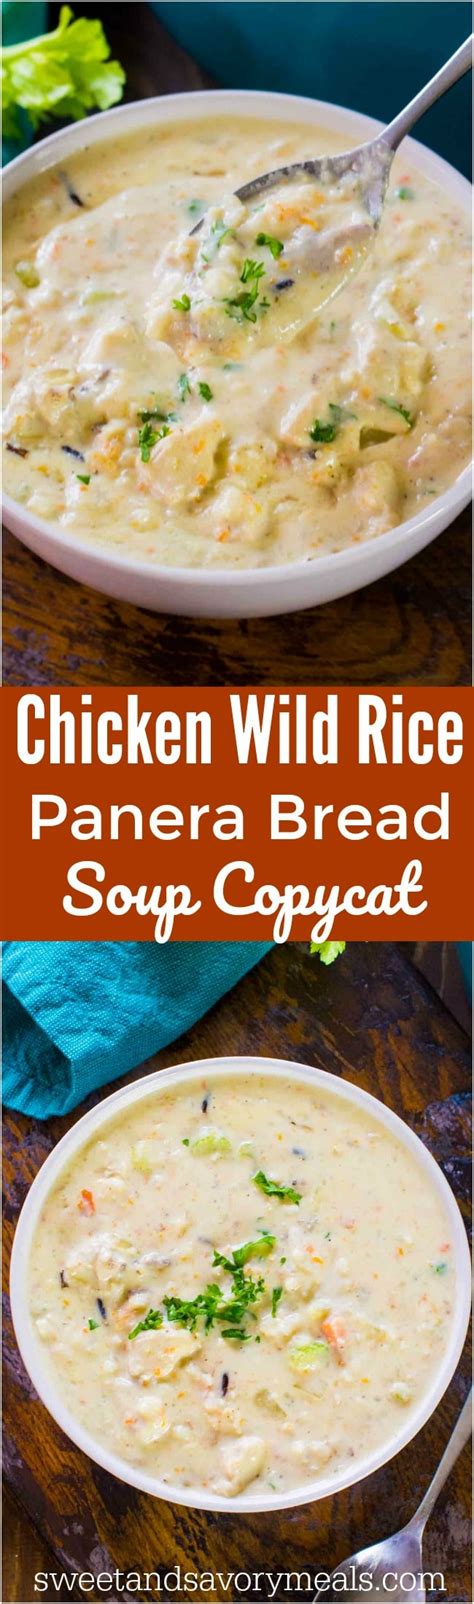 Cook on high for 2½ hours or on low for 5 hours. Panera Bread Chicken Wild Rice Soup - Copycat - Sweet and ...